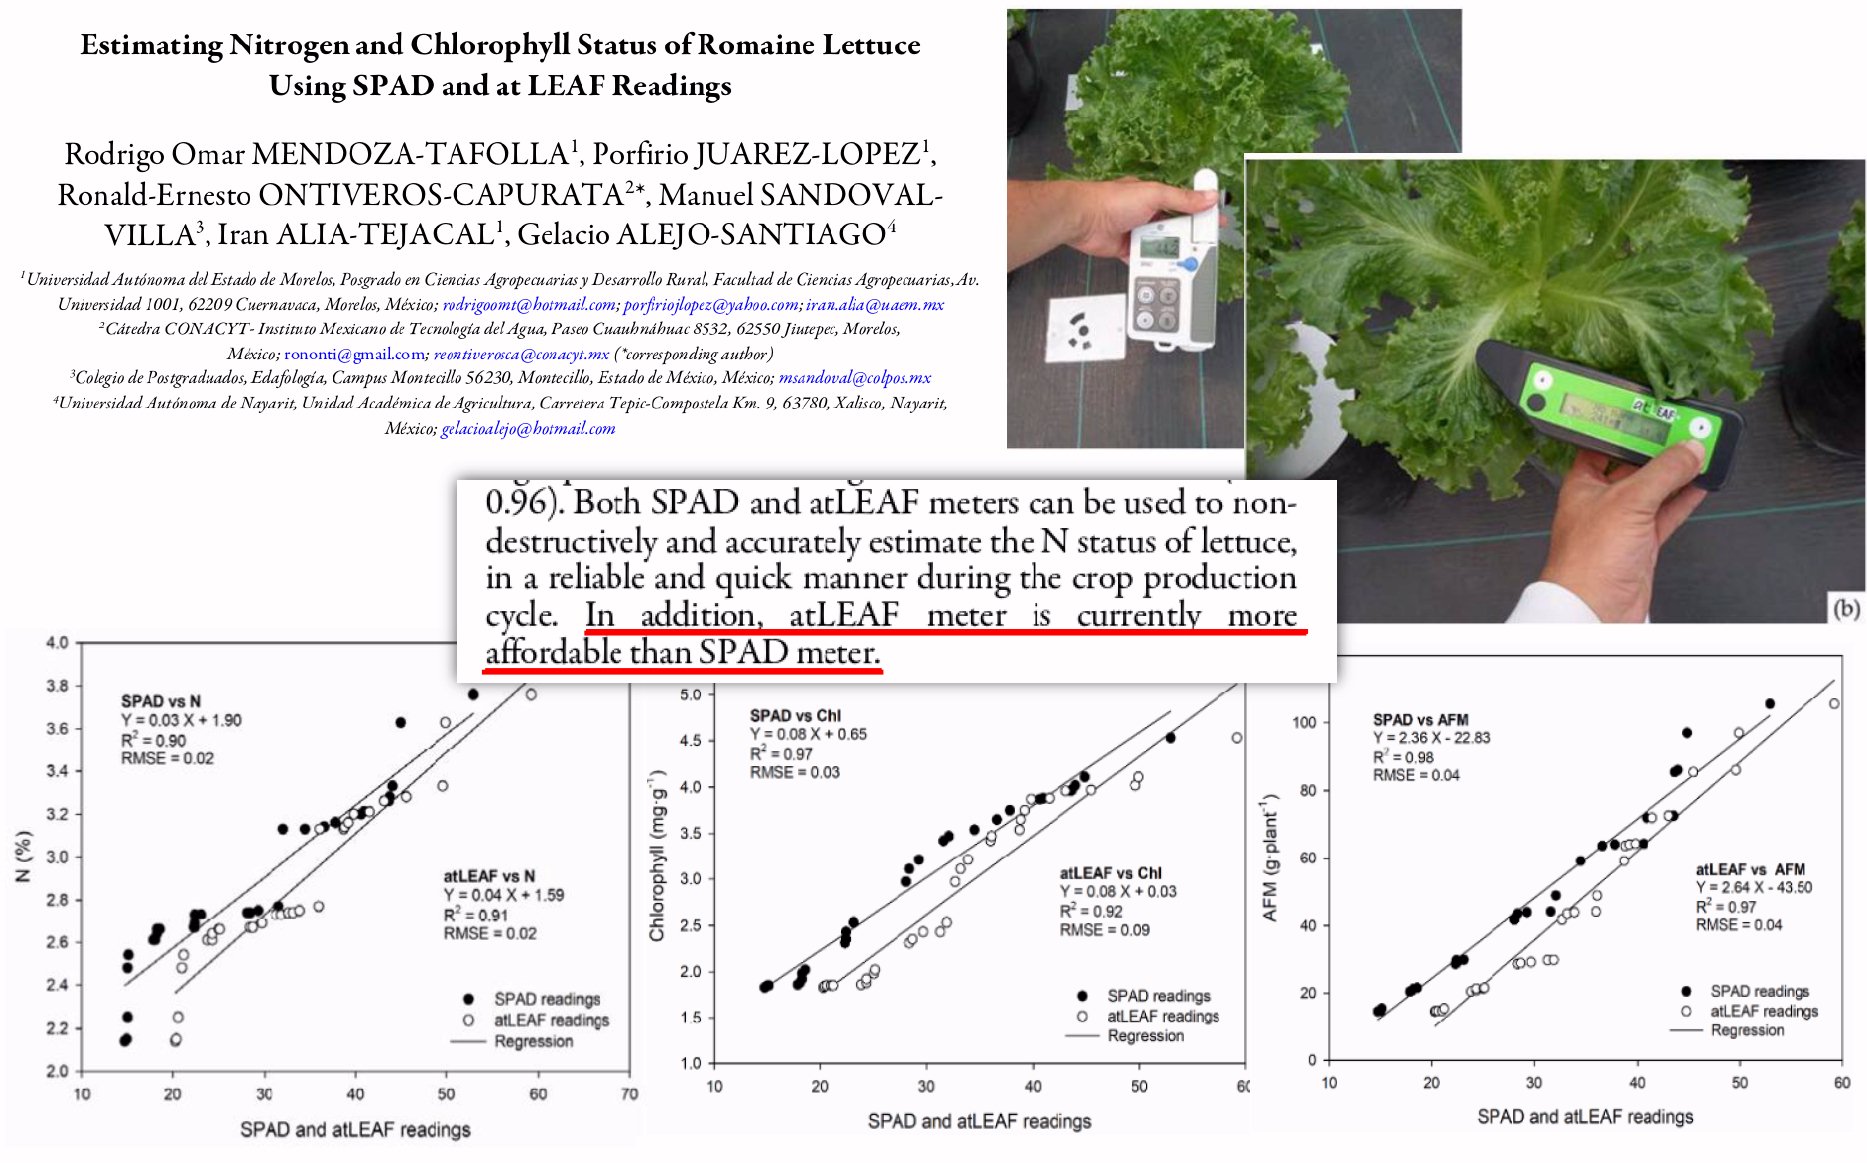 Estimating Nitrogen and Chlorophyll Status of Romaine Lettuce using SPAD and atLEAF readings